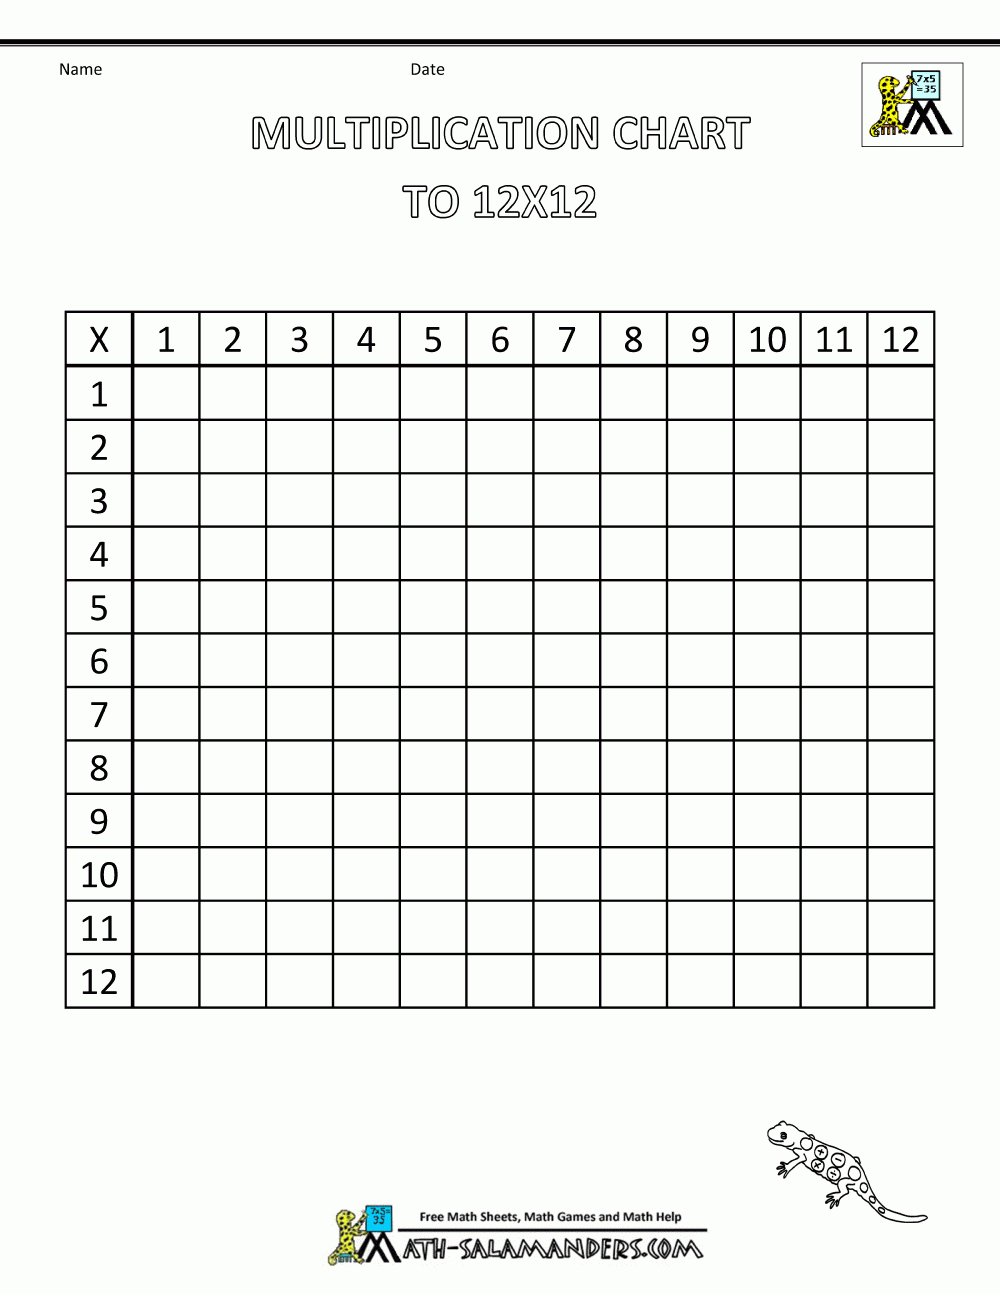 Multiplication Times Table Chart To 12X12 Blank regarding Printable 12X12 Multiplication Table